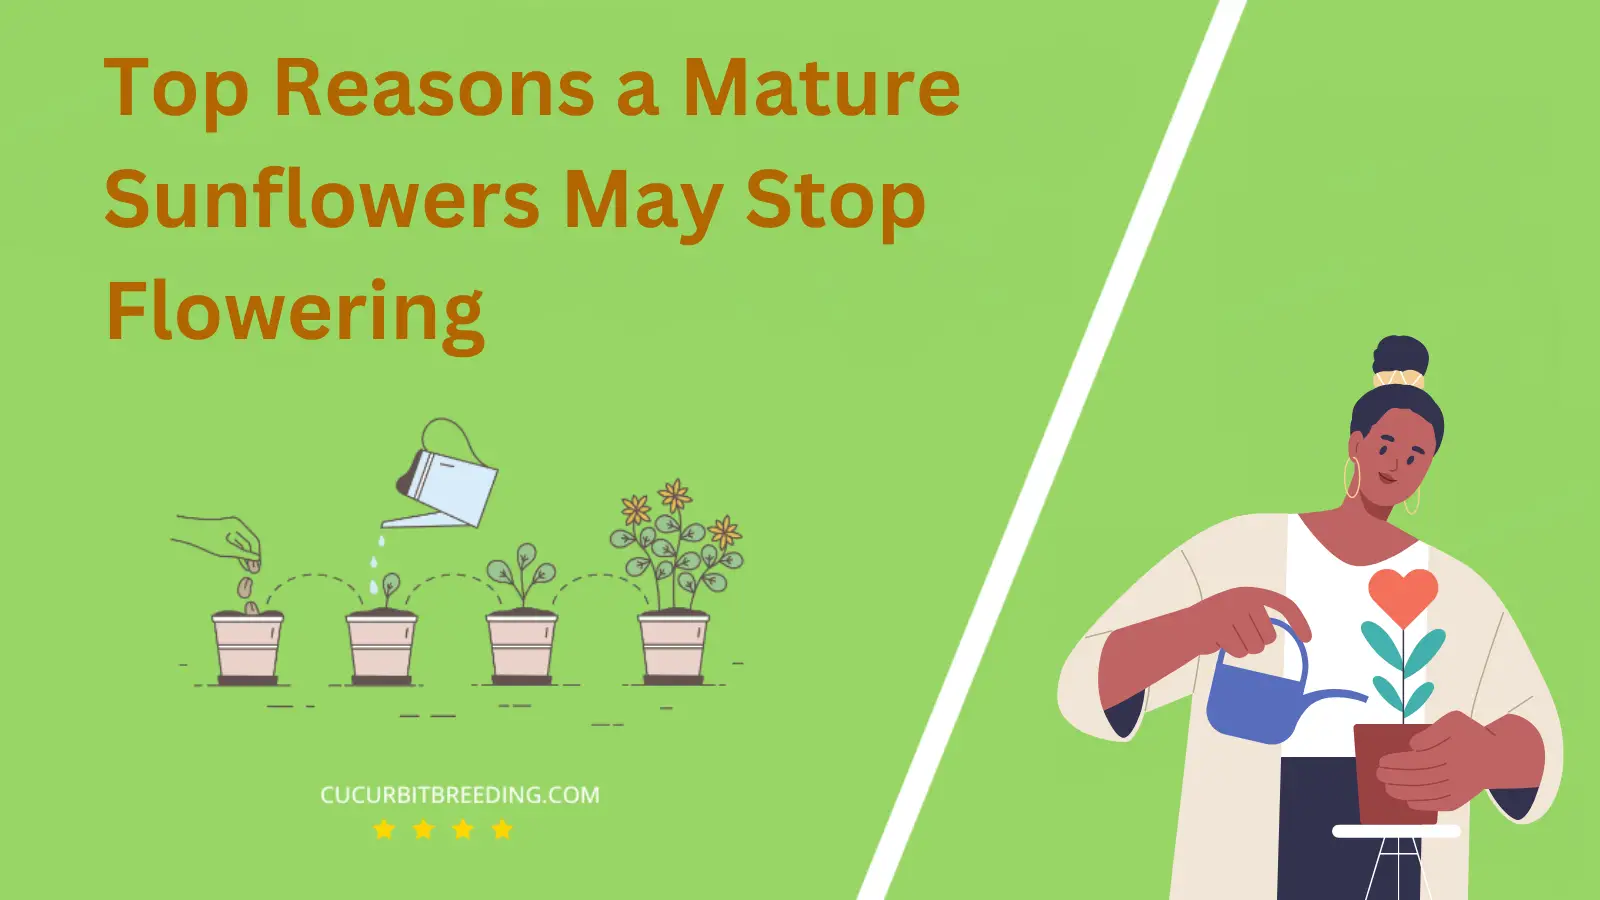 Top Reasons a Mature Sunflowers May Stop Flowering